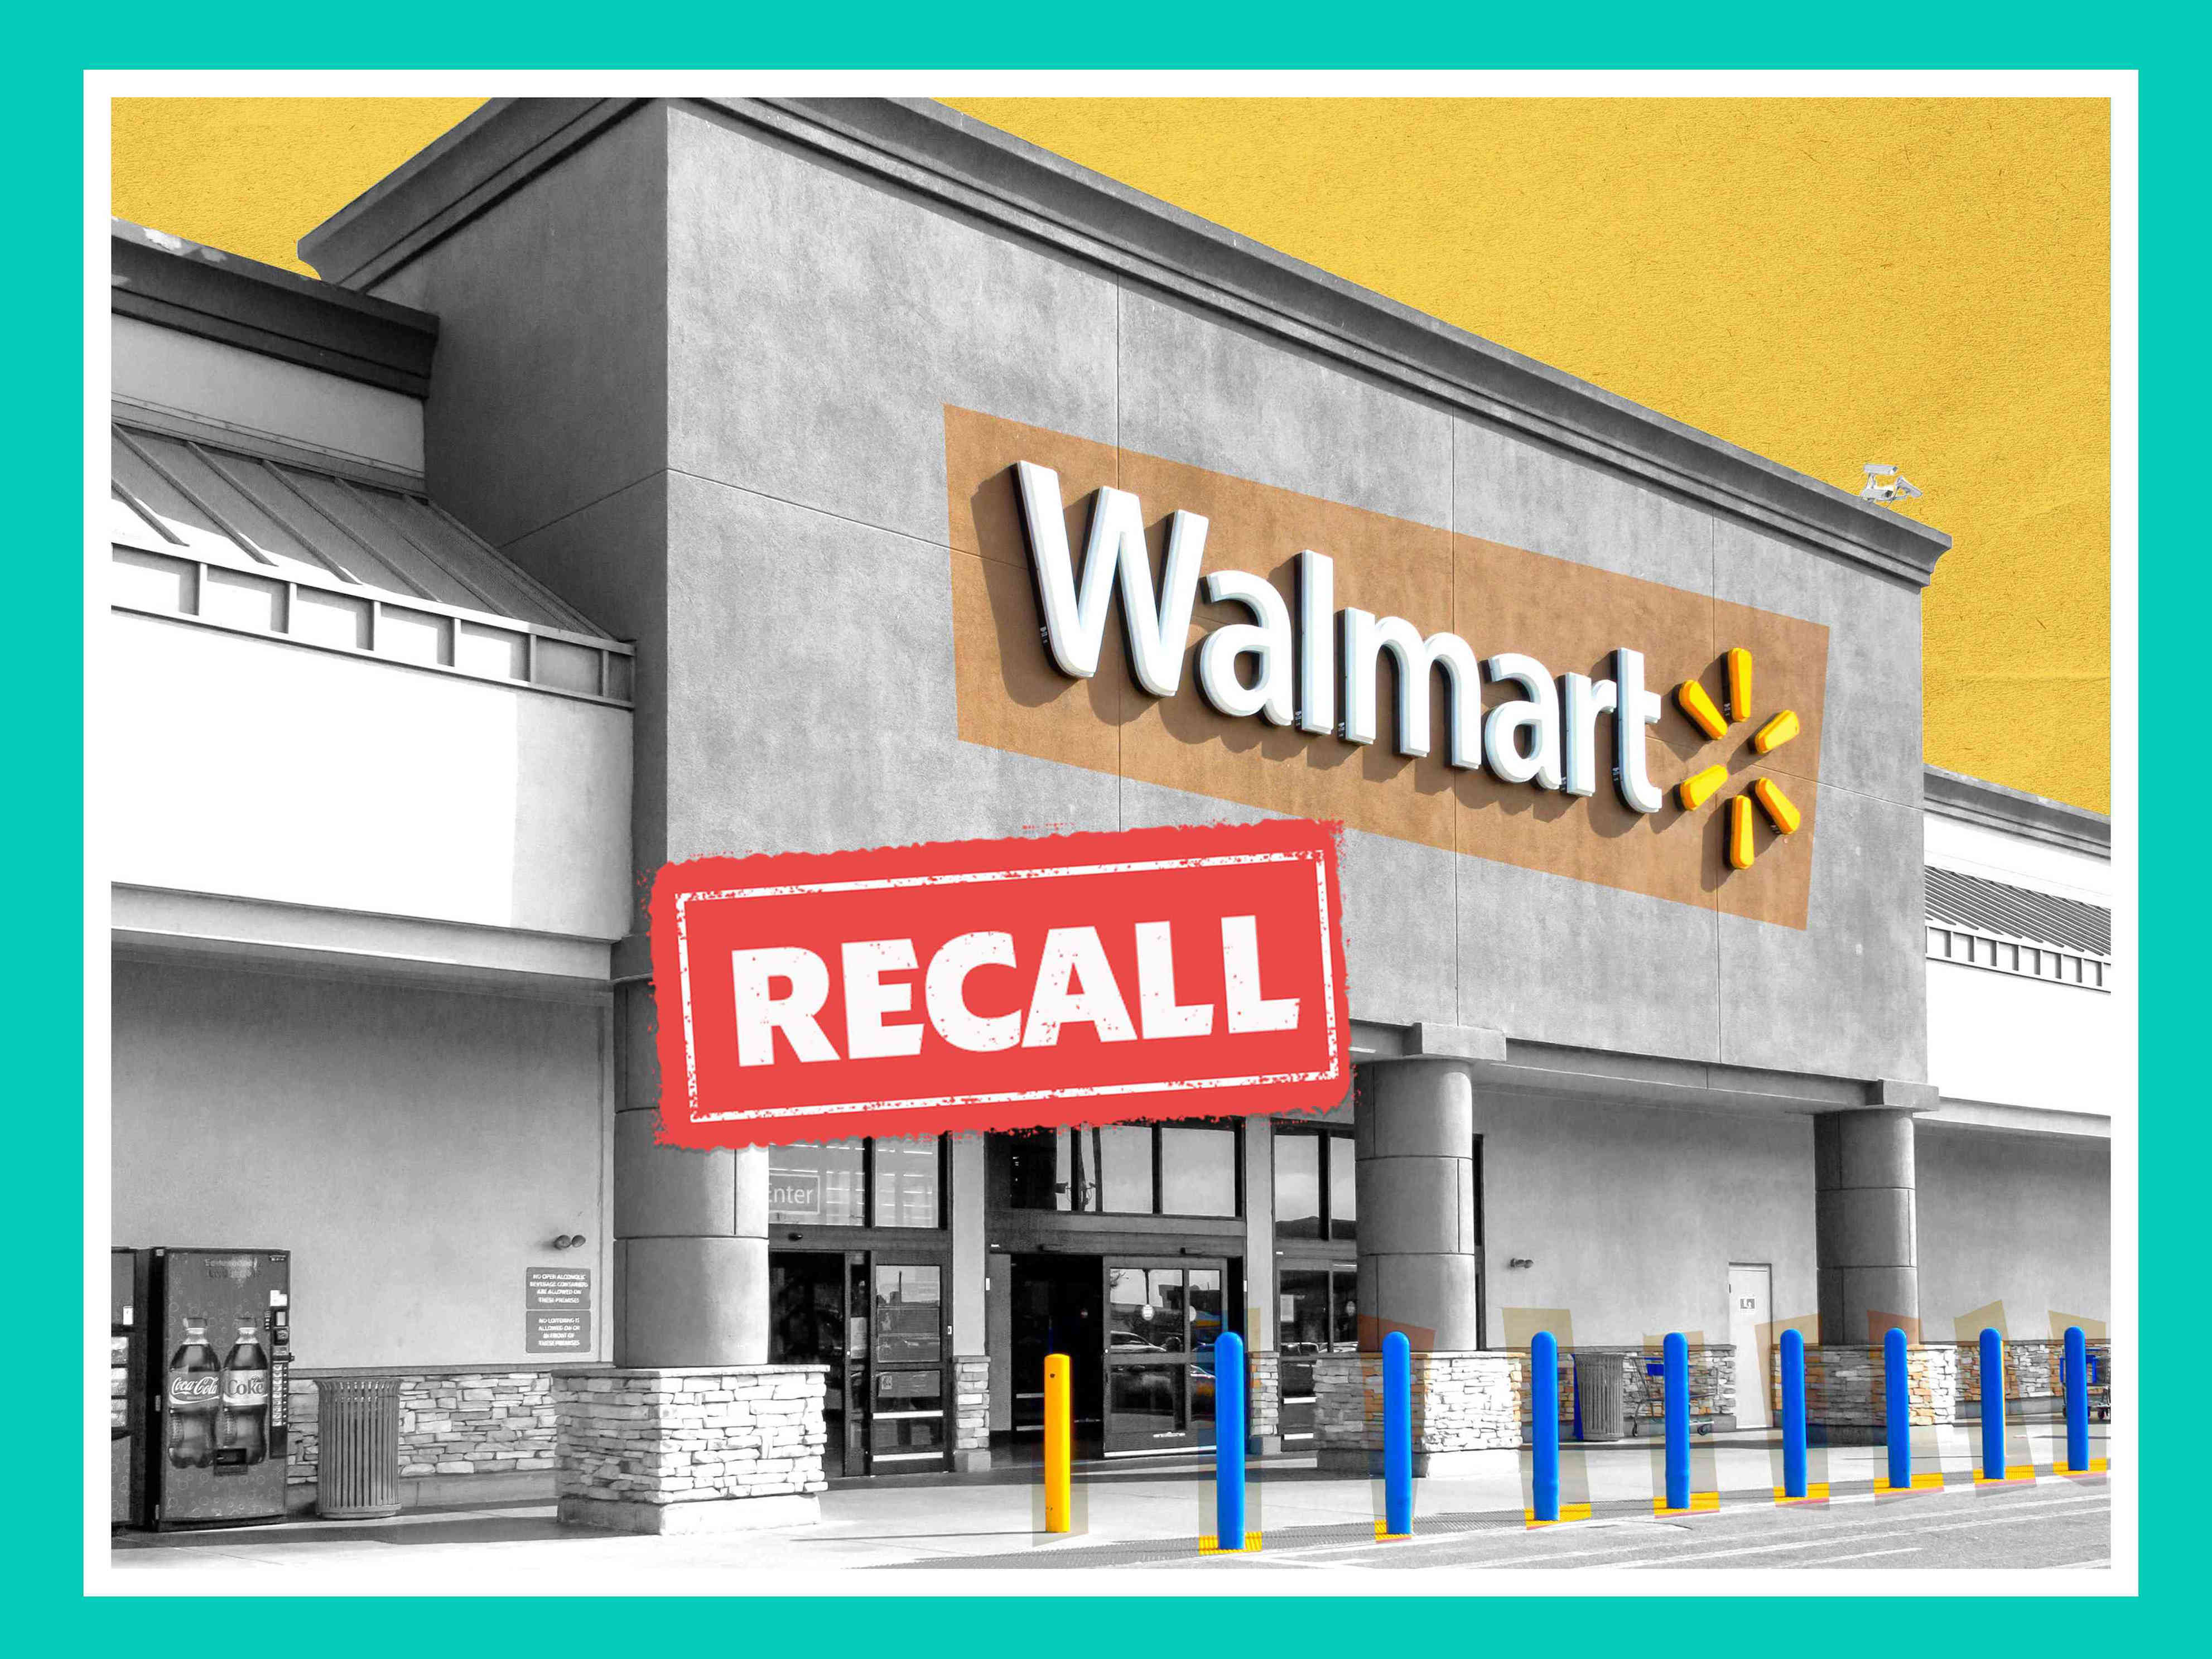 thousands of great value cookies recalled from walmart because they may contain plastic pieces